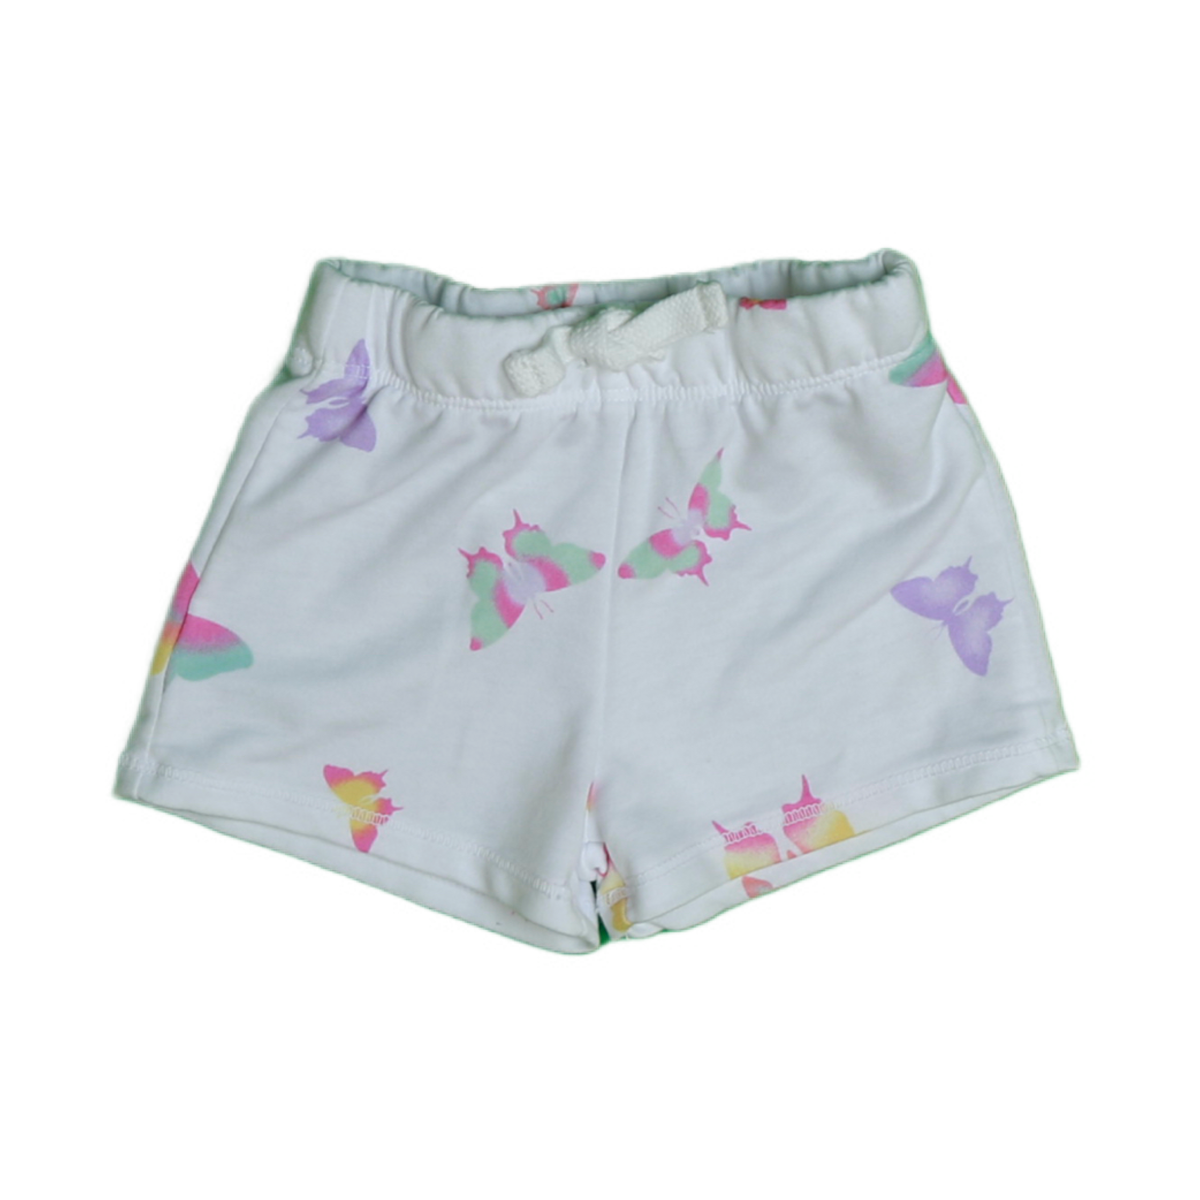 White shorts with multi color butterflies all over